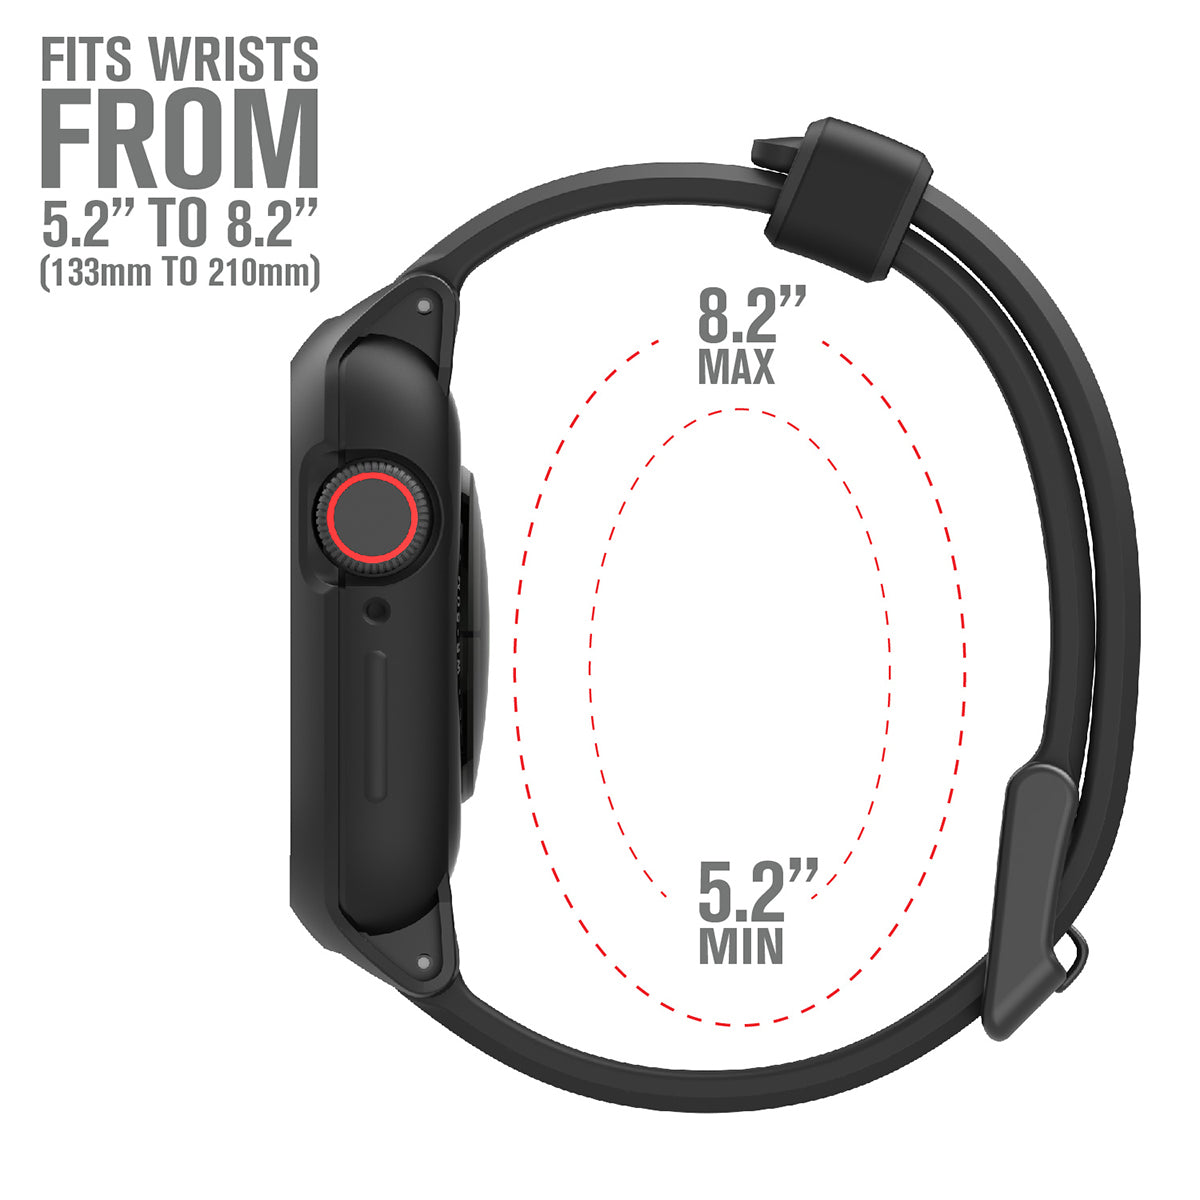 catalyst apple watch series 9 8 7 6 5 4 SE Gen 2 1 38 40 41mm sport band buckle edition side view of the case with the minimum and maximum sizes of the band black text reads fits wrists from 5.2" to 8.2"(133mm to 210mm)